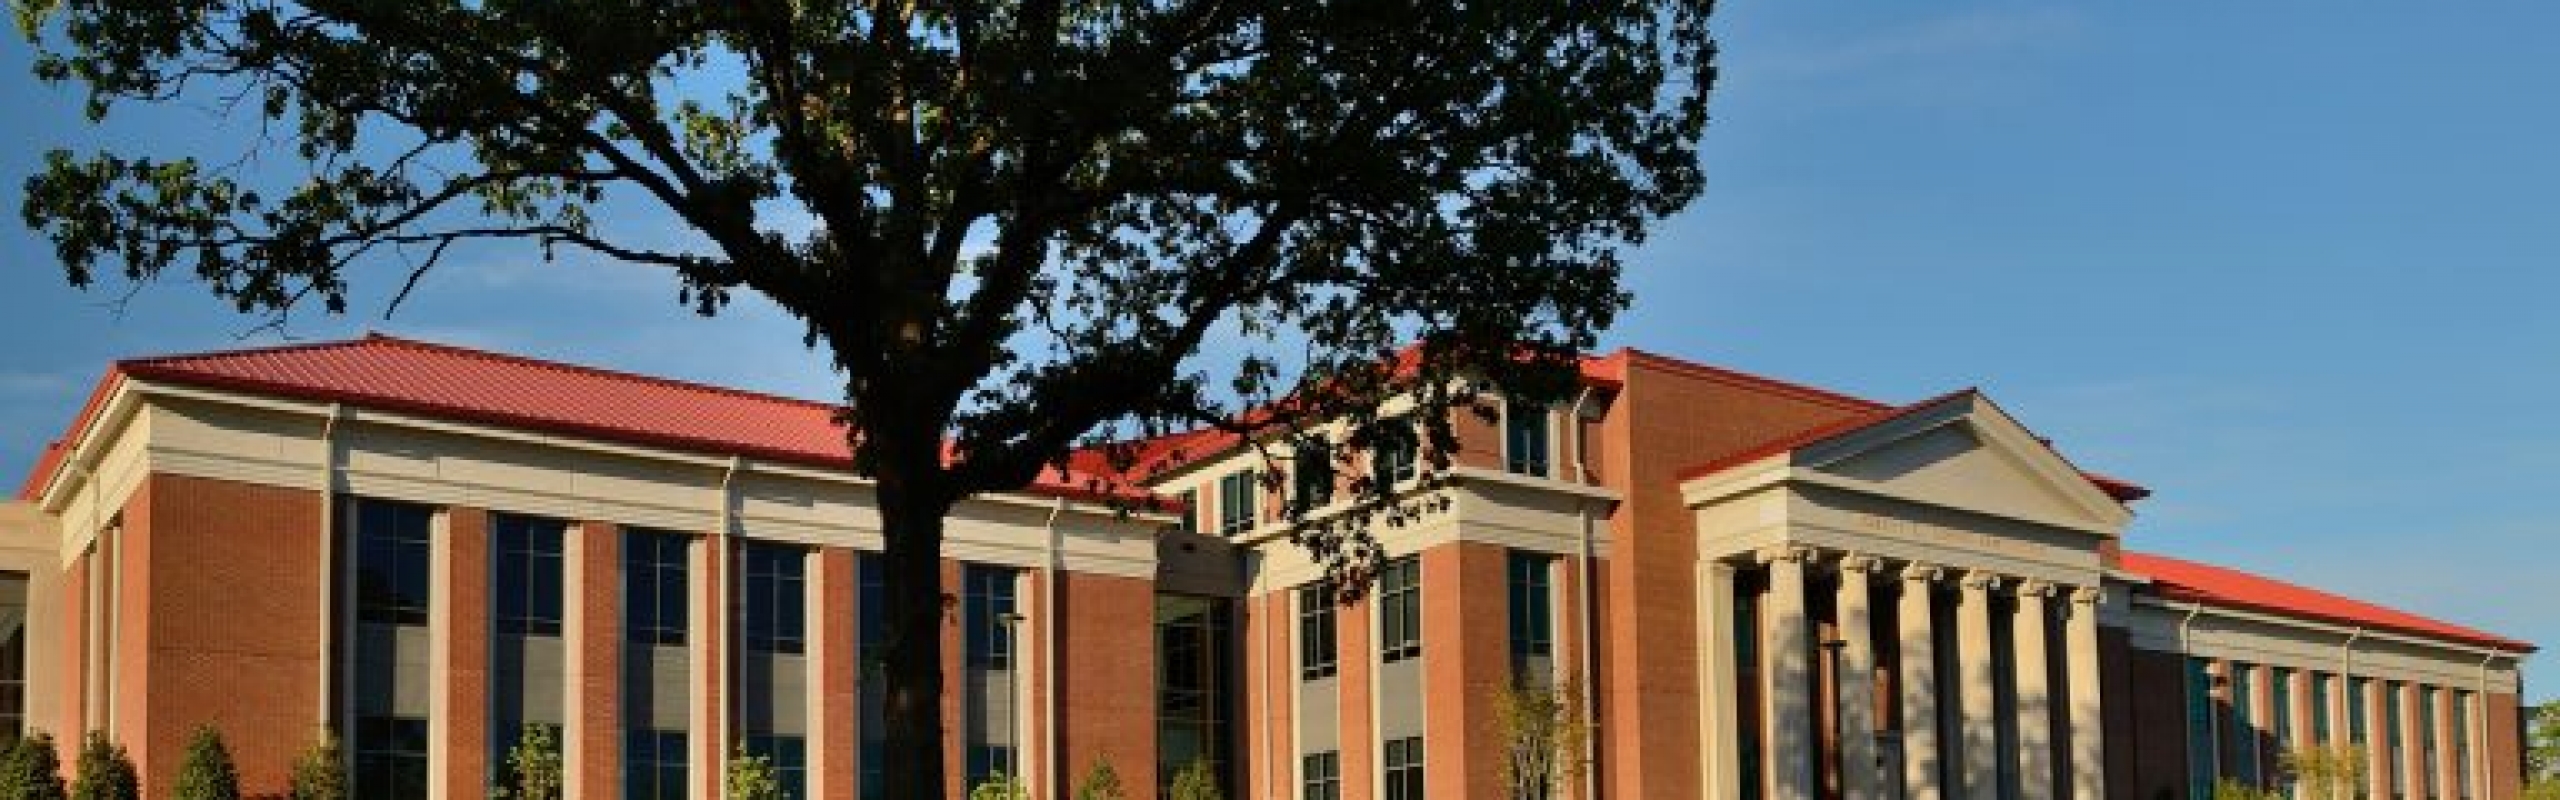 The University of Mississippi School of Law